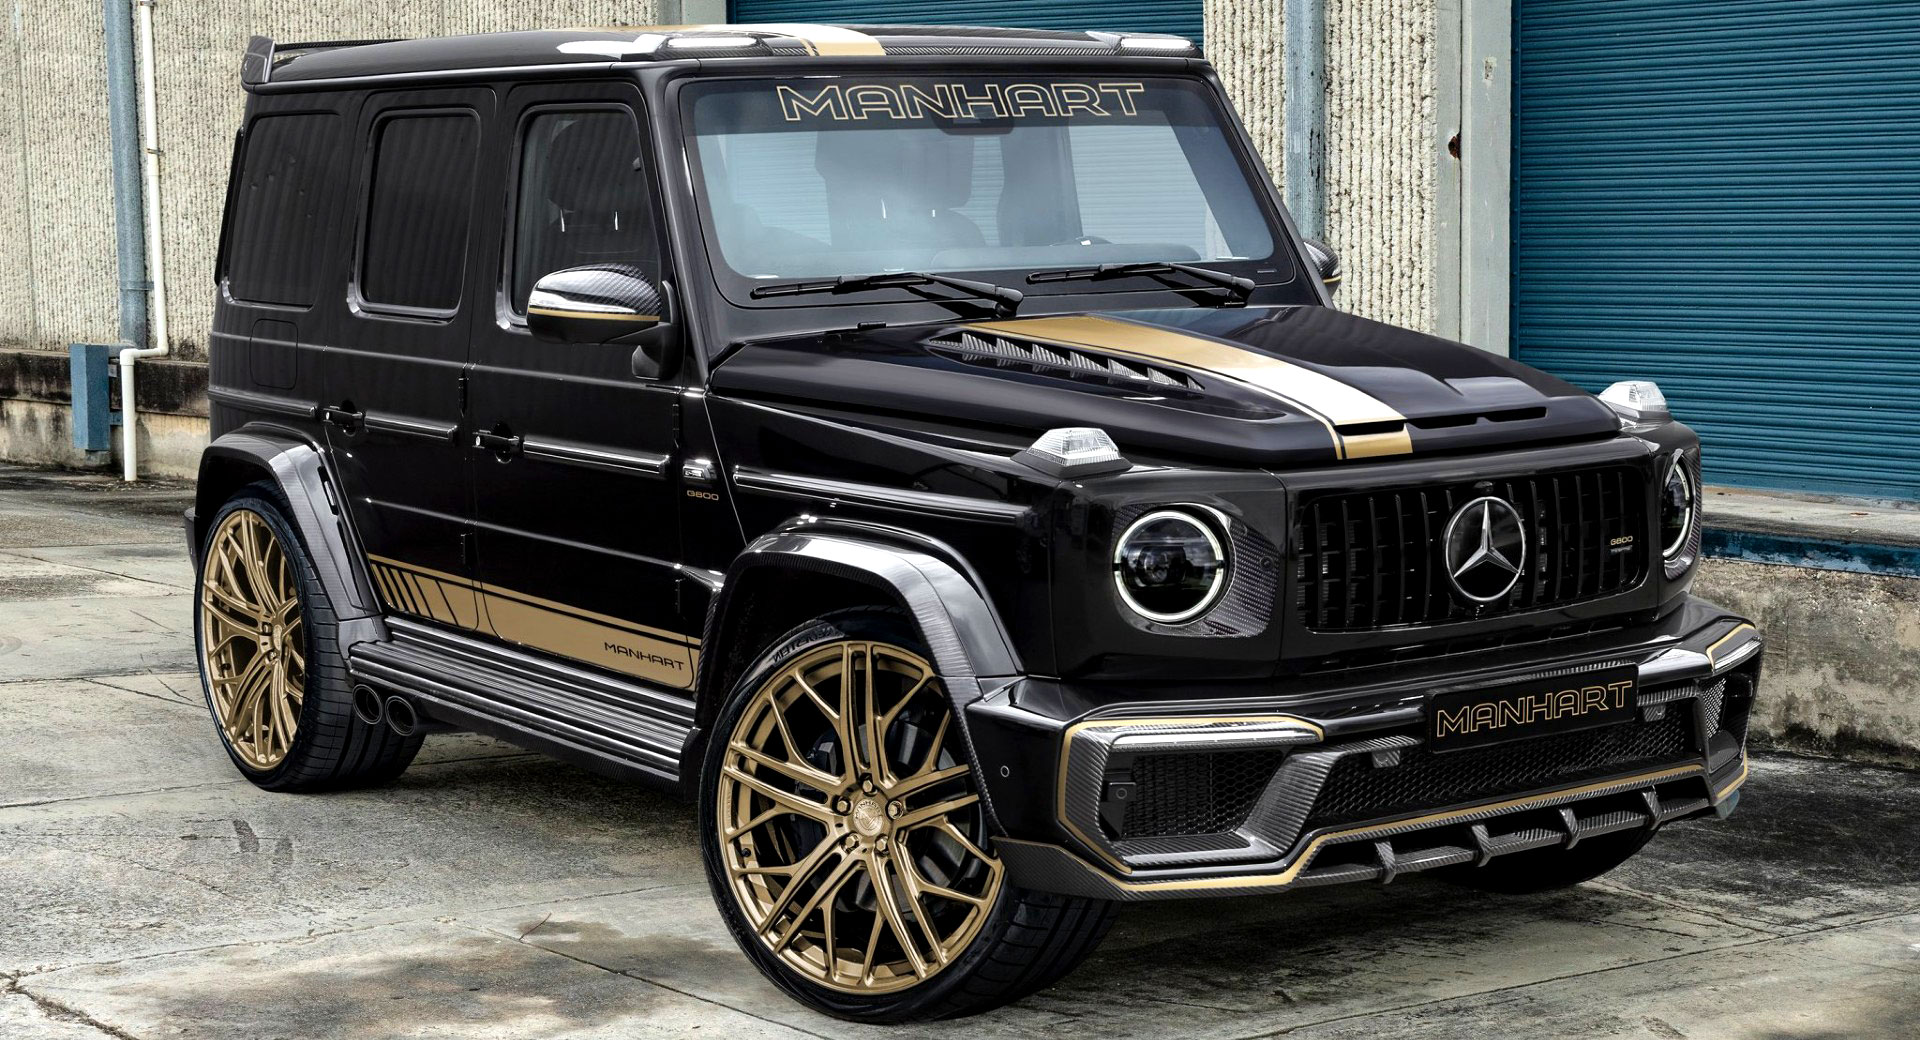 Recon [Full Digital Meter] 2020 Mercedes-Benz G350 2.9 d SUV / Can Upgraded  Brabus body kit / 360 camera / Full black Leather / Japan Unit With Report  